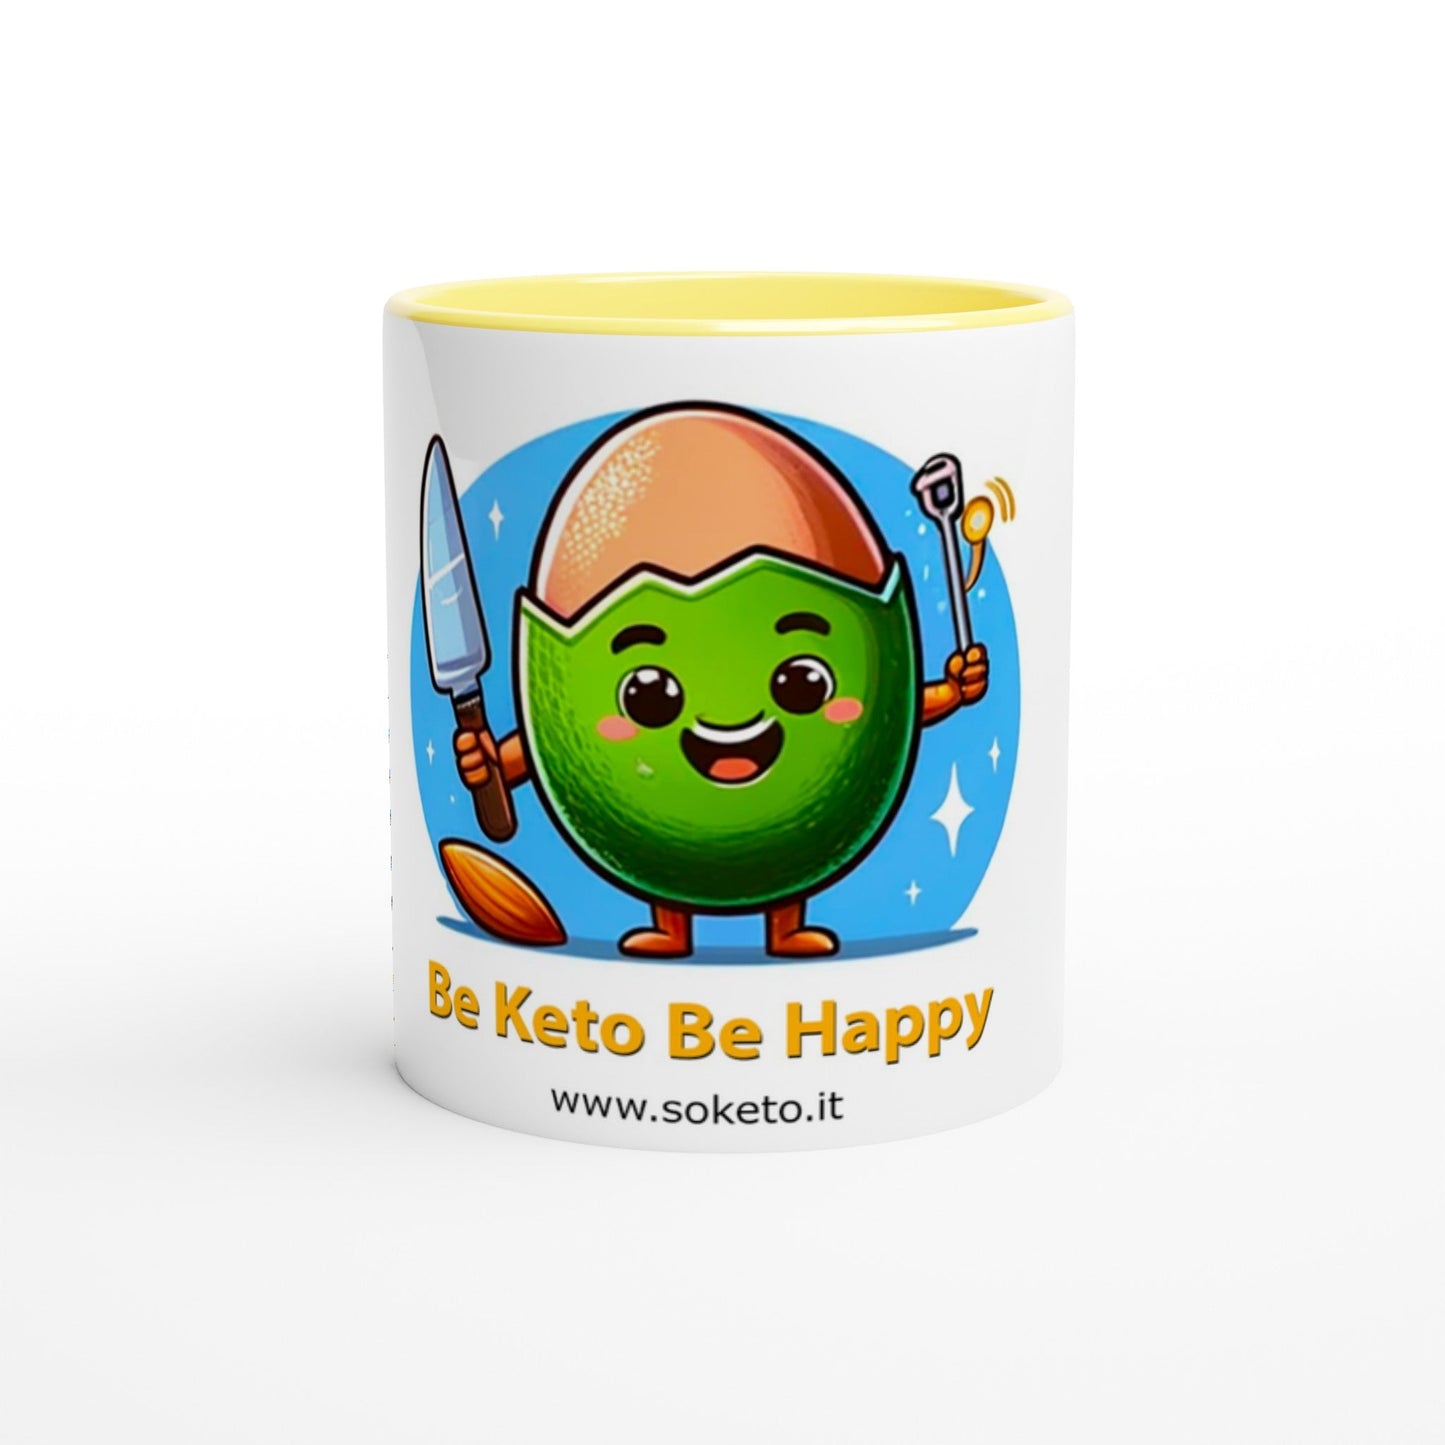 350ml "Be Keto Be Happy" Mug with Colored Interior - Start the Day with Style and Health-3